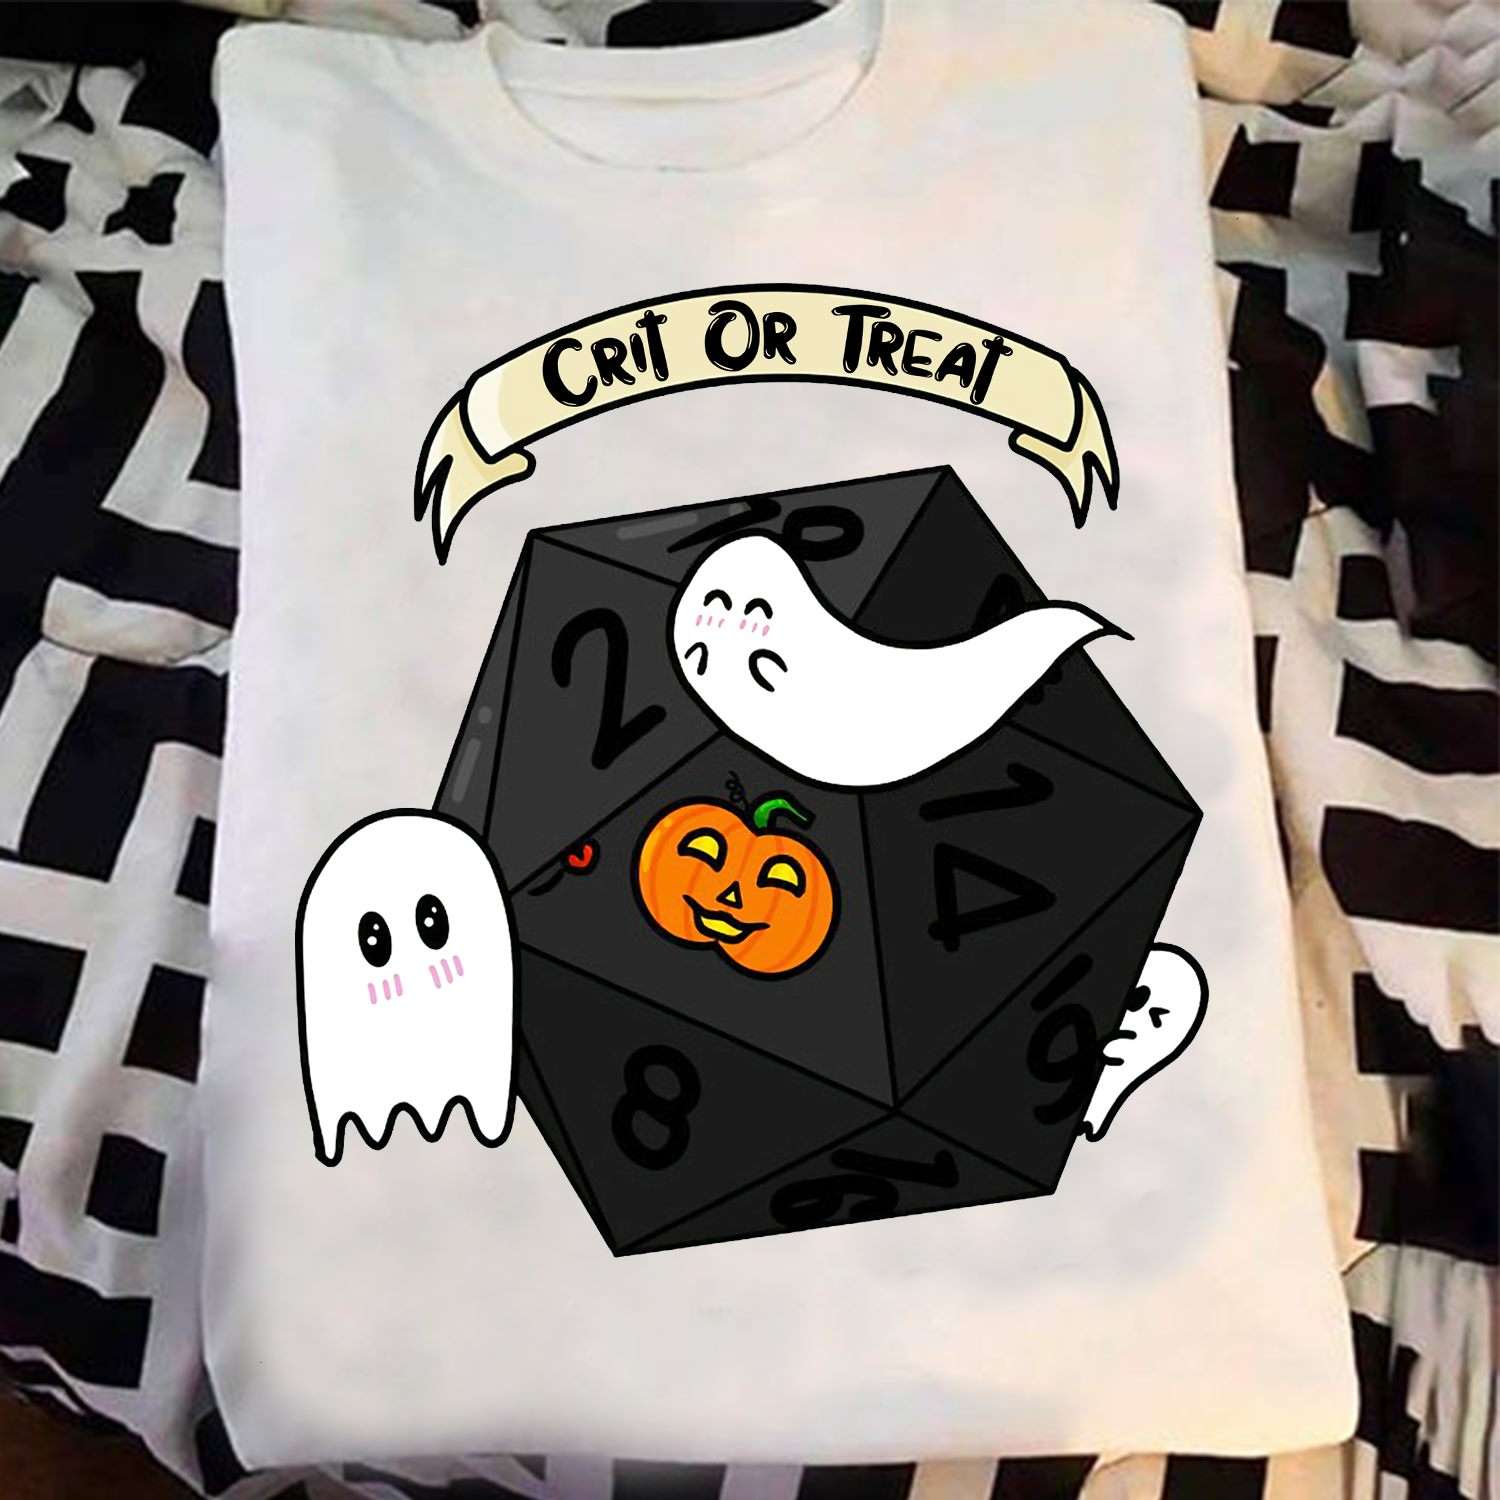 Crit or treat - Dungeons and dragons, DnD game, halloween white ghost